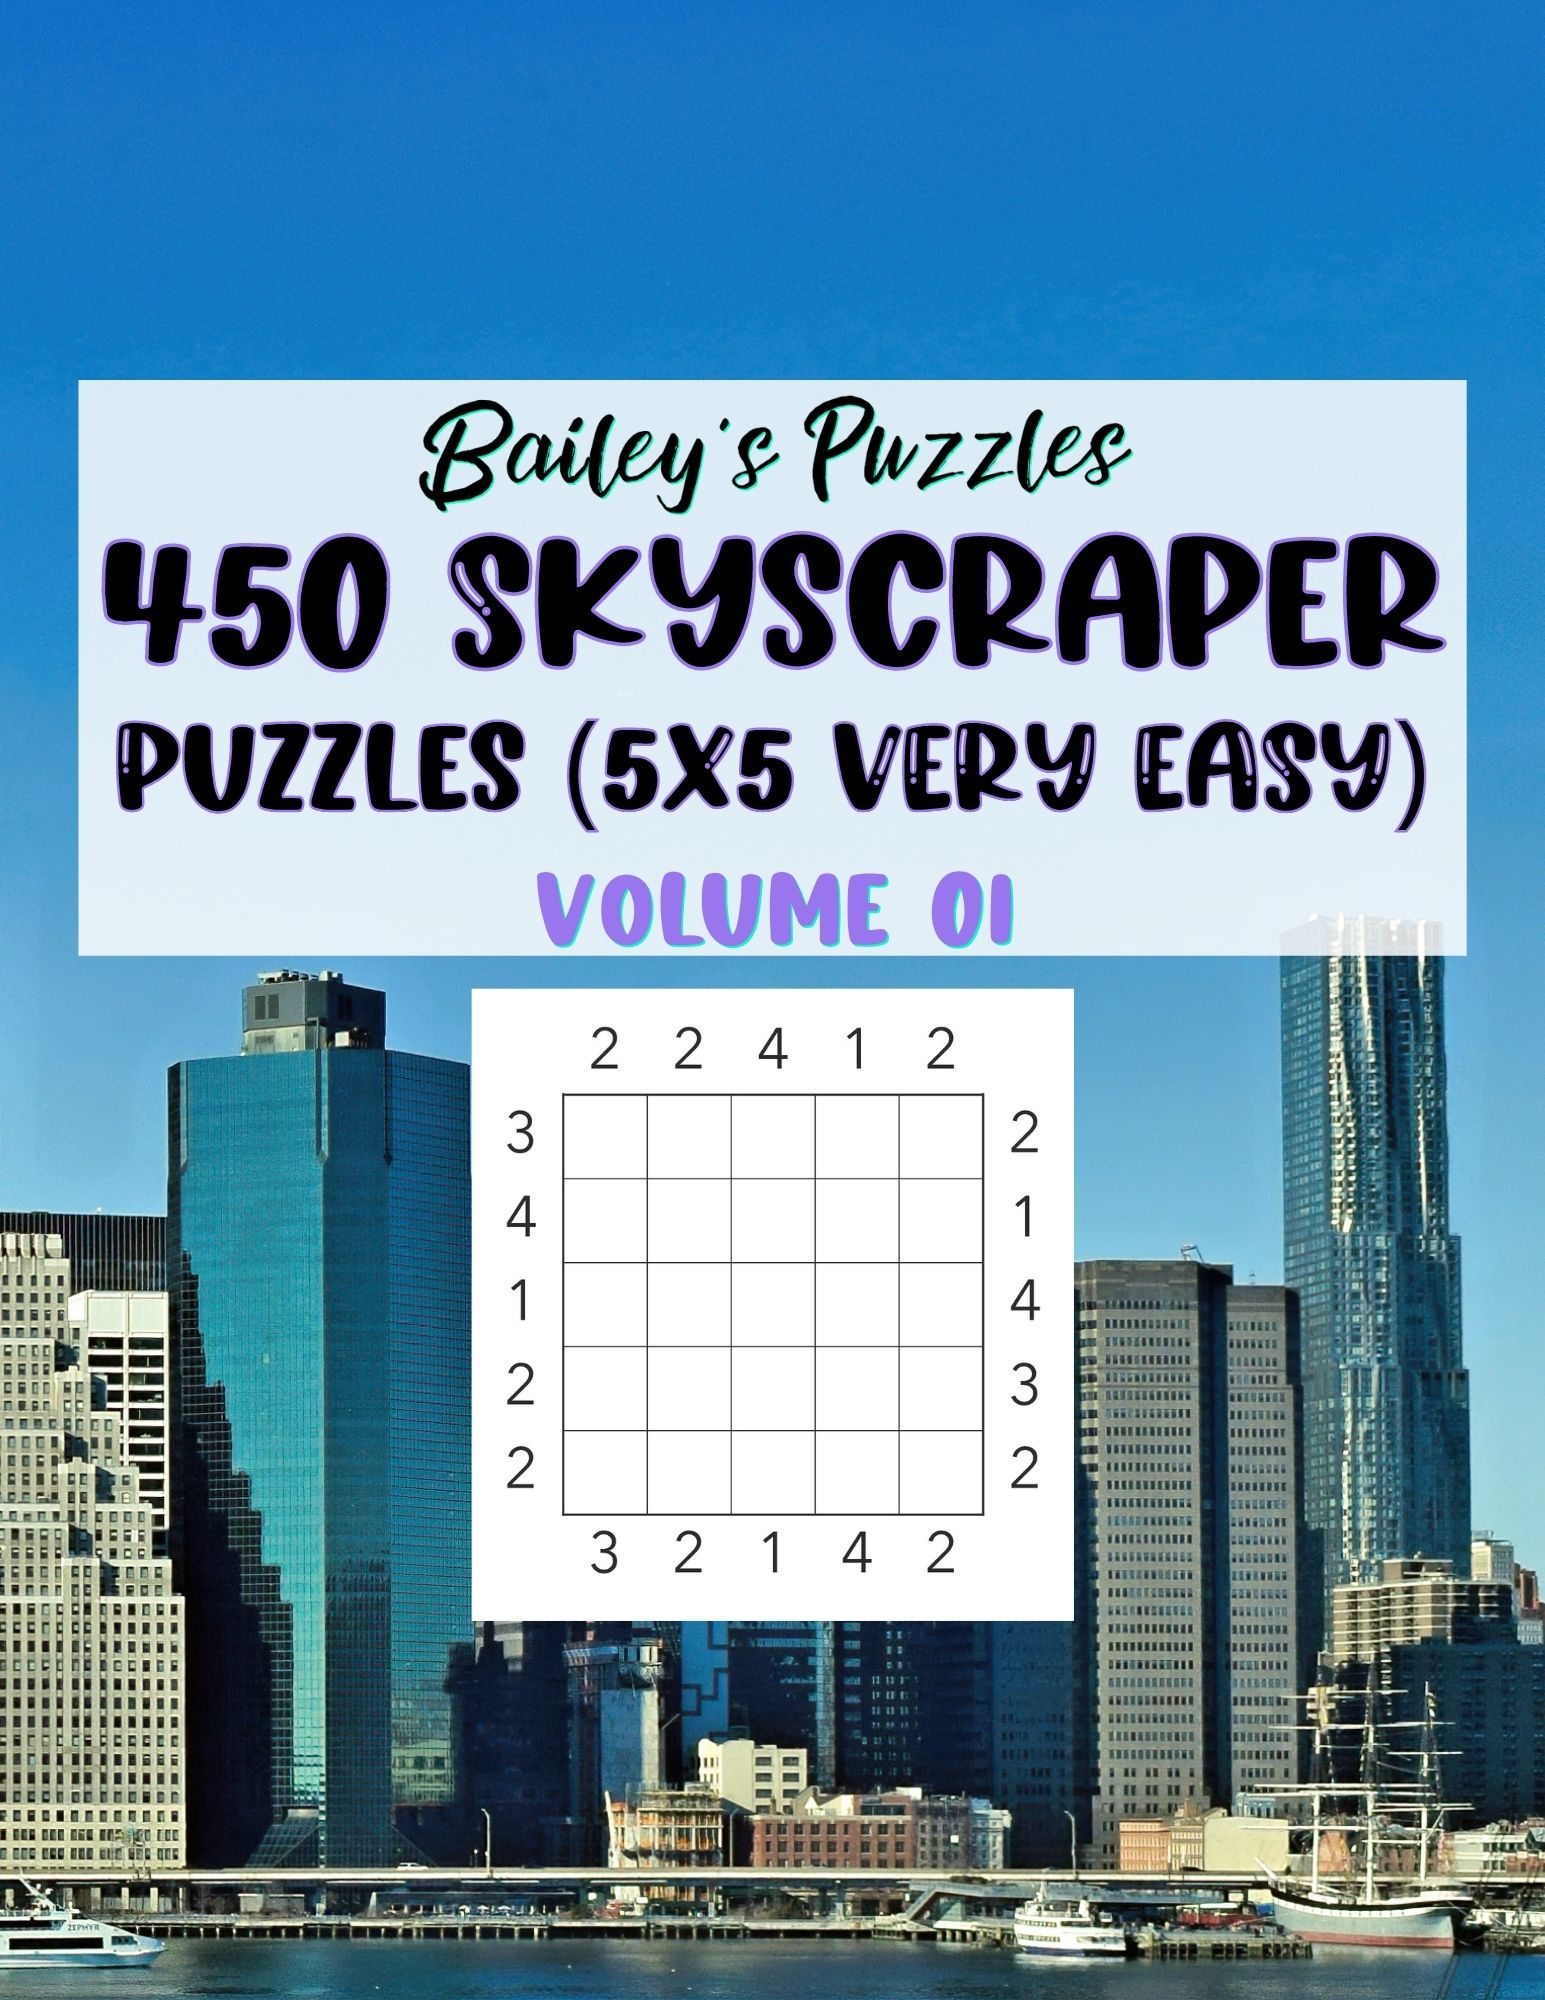 Front Cover - 450 Skyscraper Puzzles (5x5, very easy)